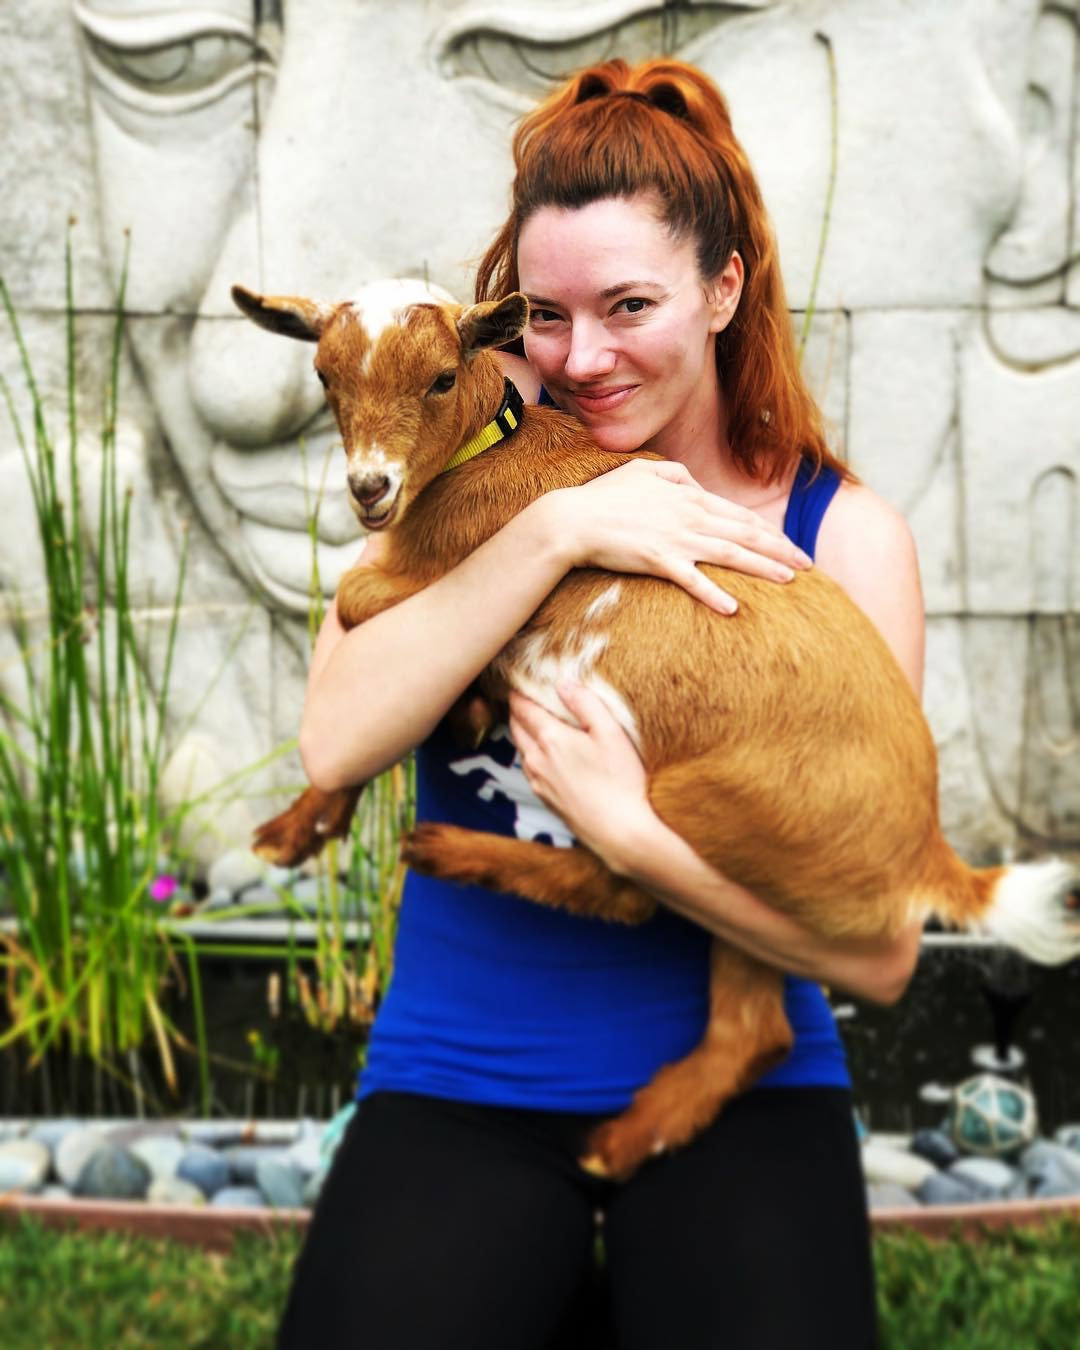 Goat Yoga in Los Angeles. Goats for parties, events, film shoots!, and  hiking with goats in Los Angeles! - Party Goats LA